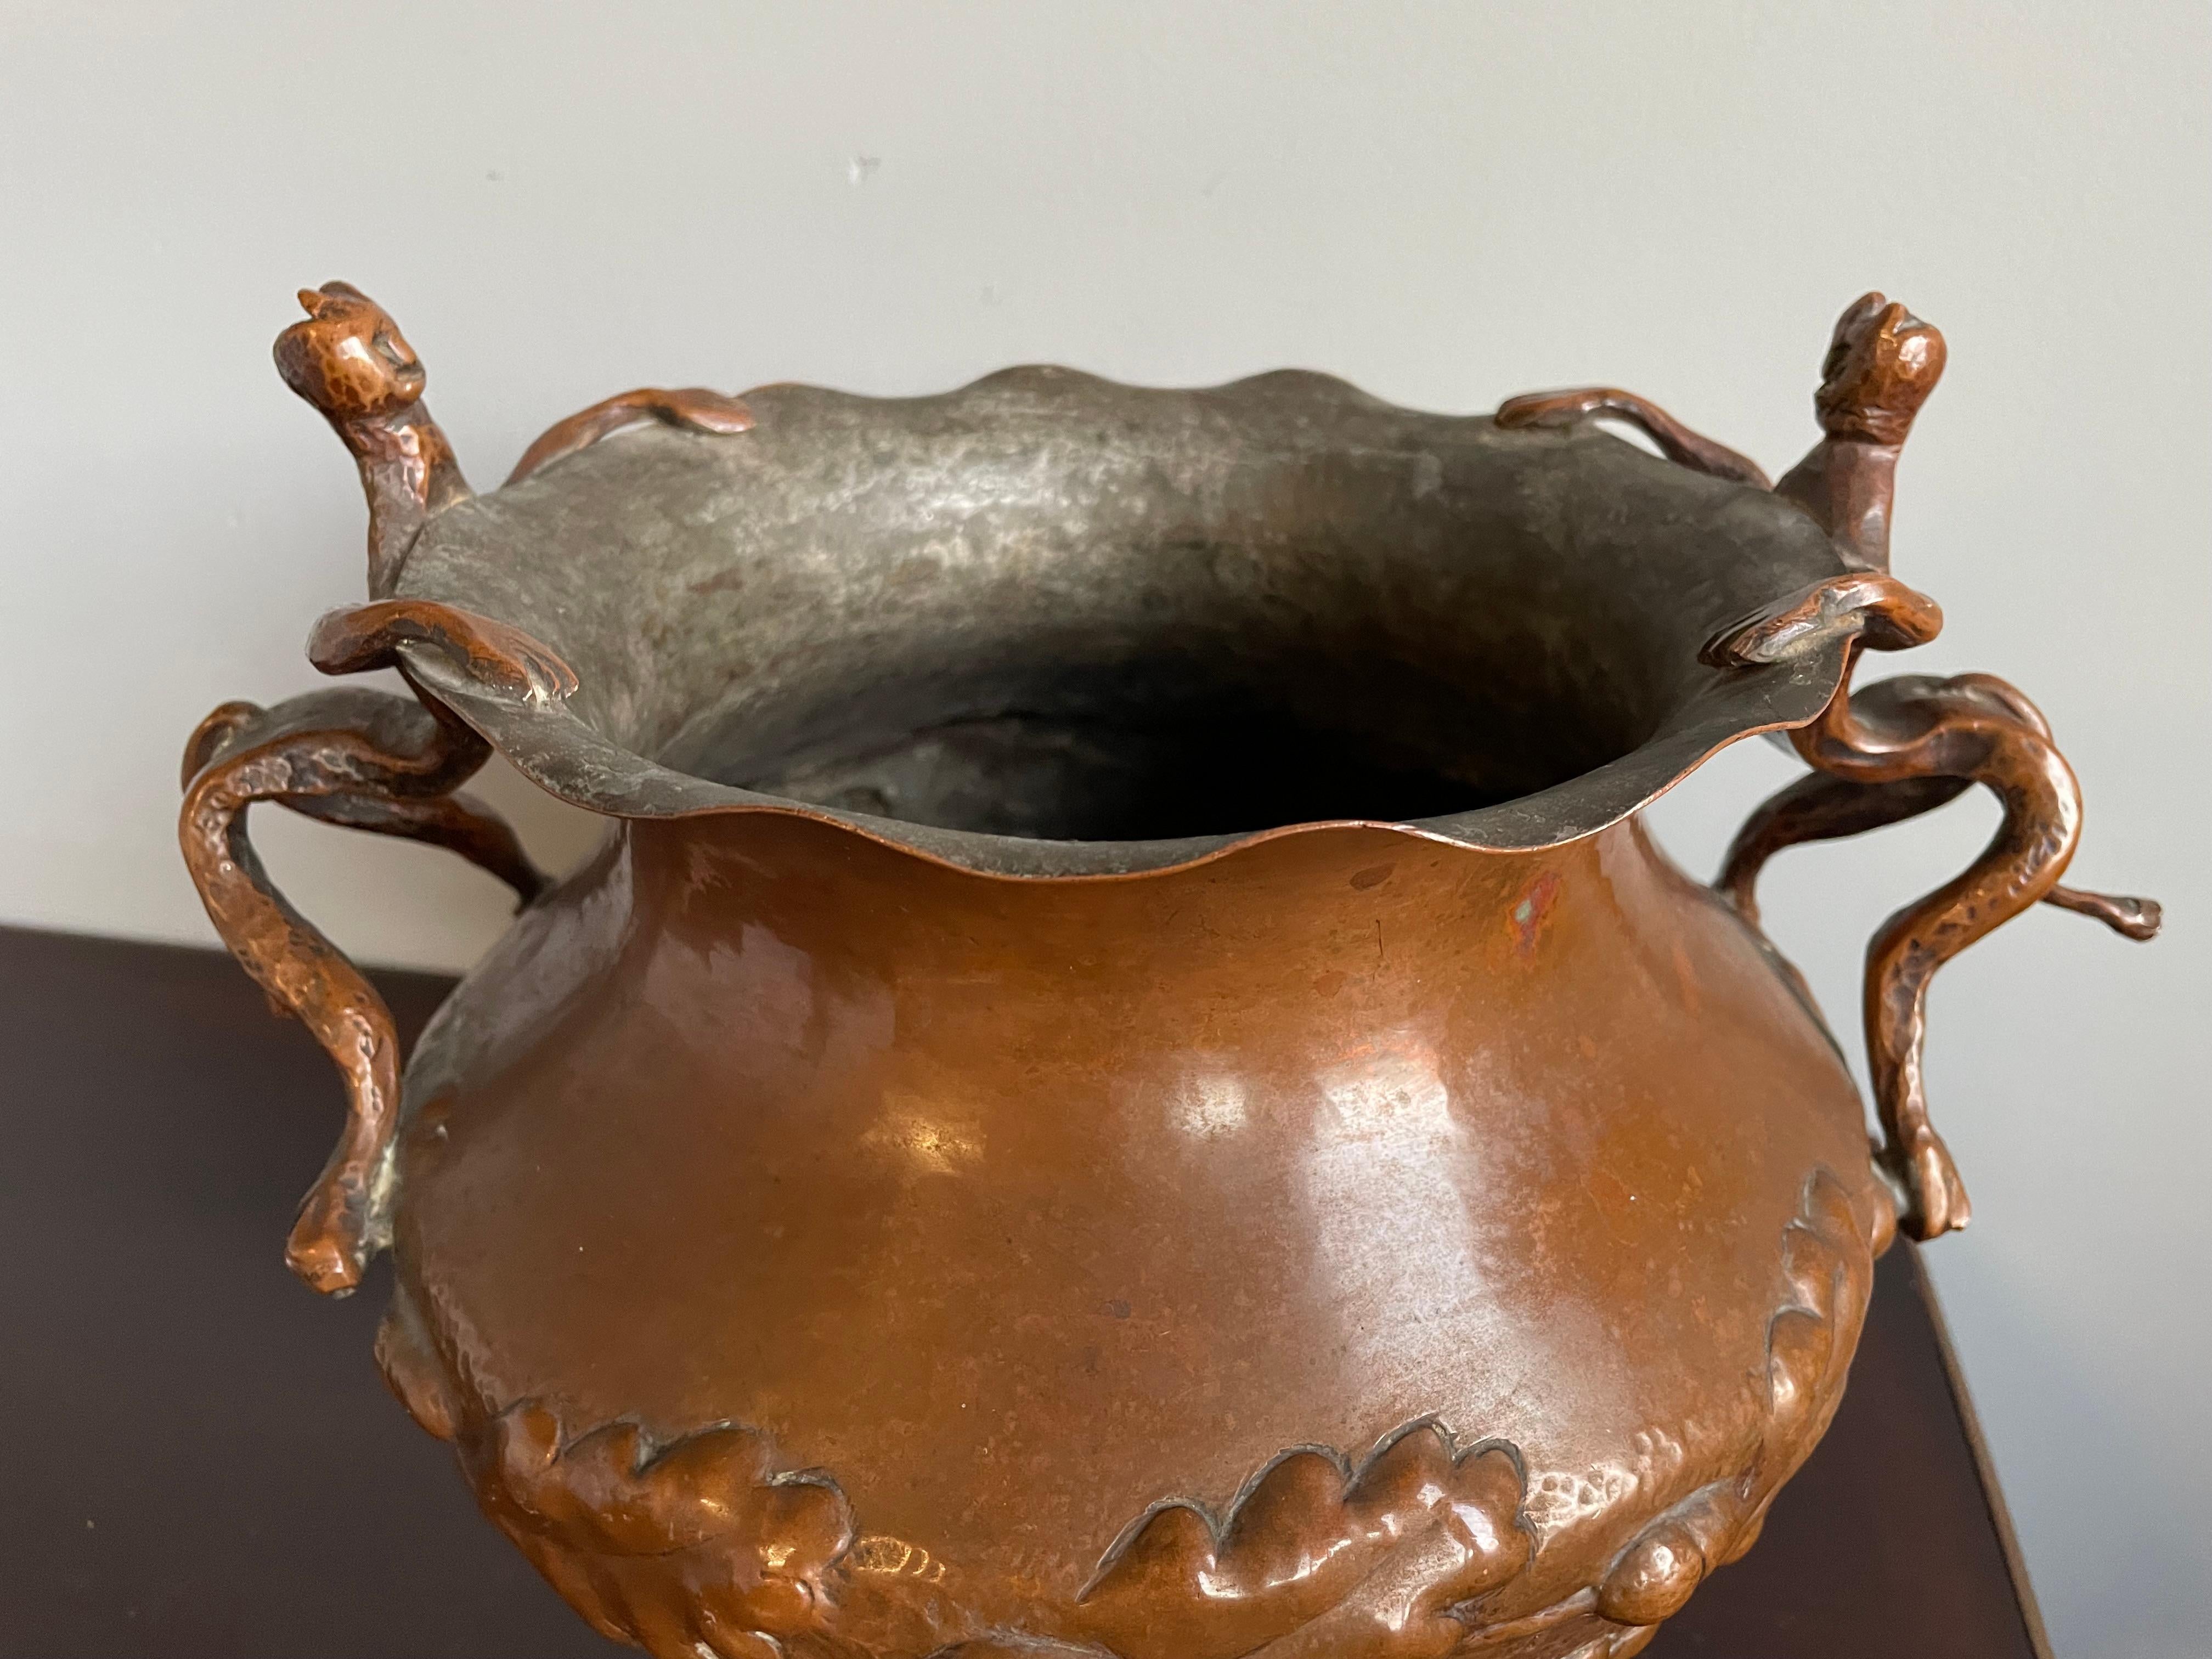 European Unique Mid 1800s Embossed Copper Planter / Vase with Satyr Sculptures as Handles For Sale